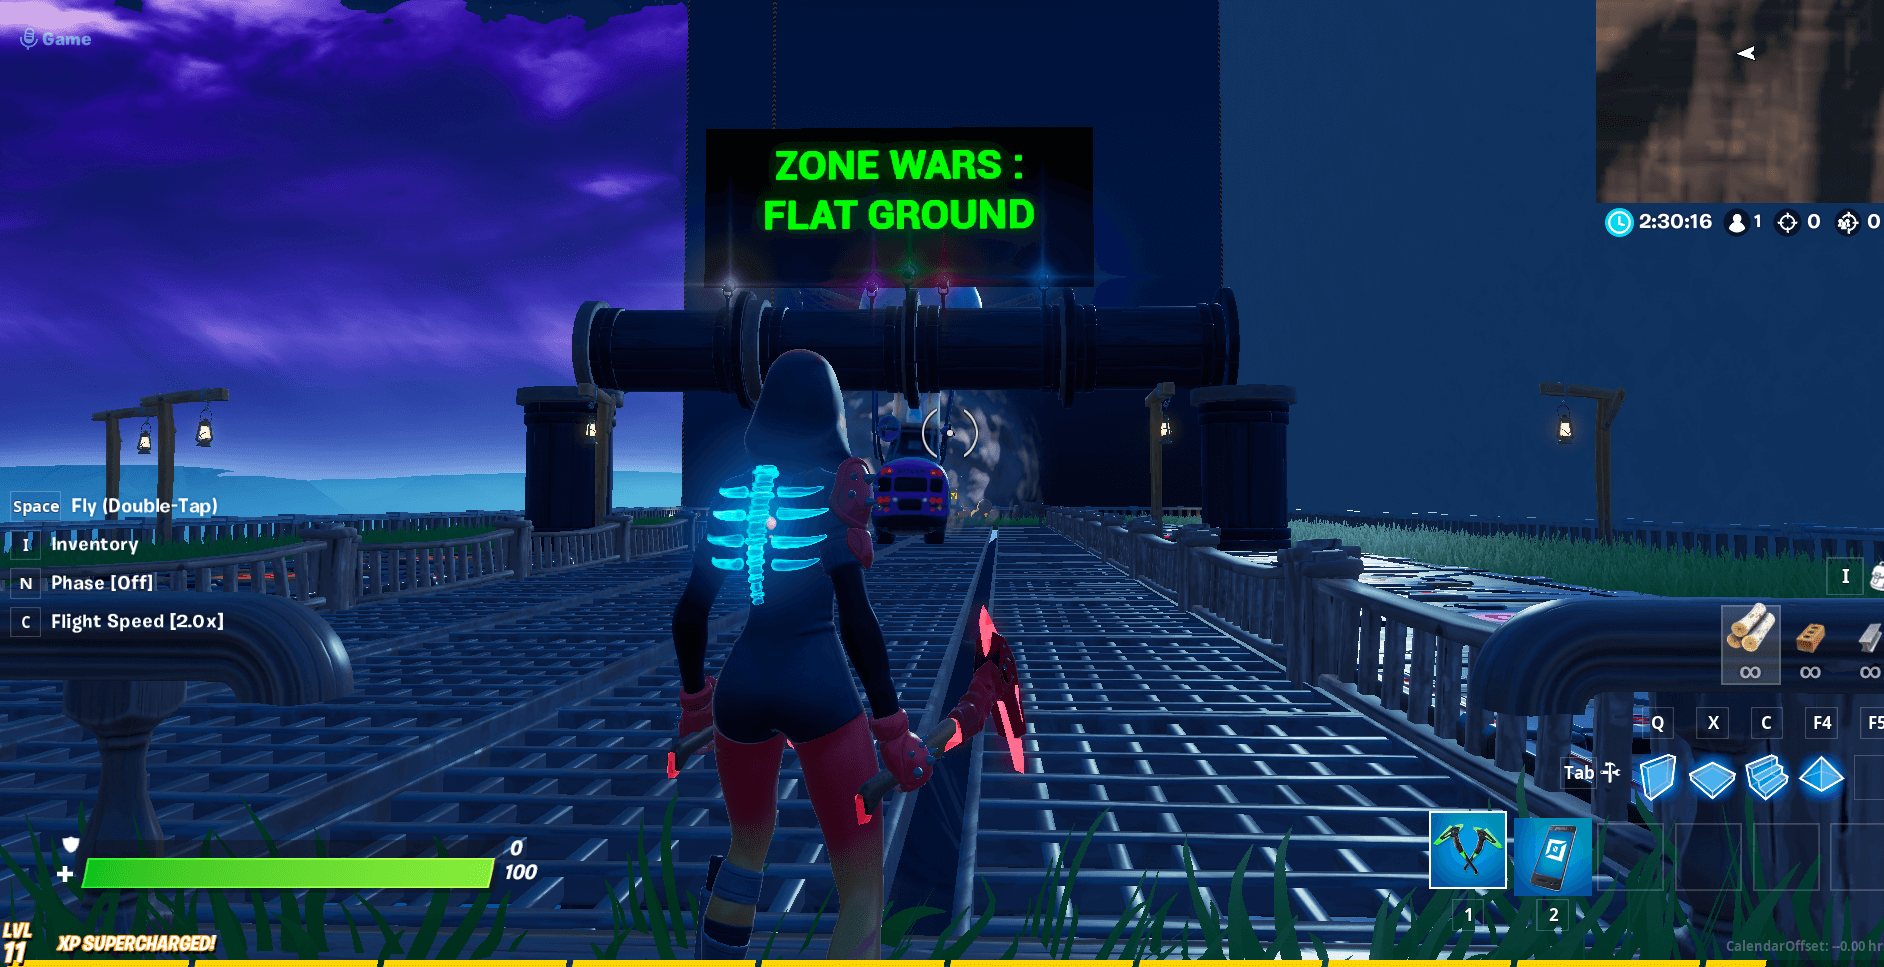 How To Get Flat Land Fortnite Creative Zone Wars Flat Ground Fortnite Creative Map Code Dropnite